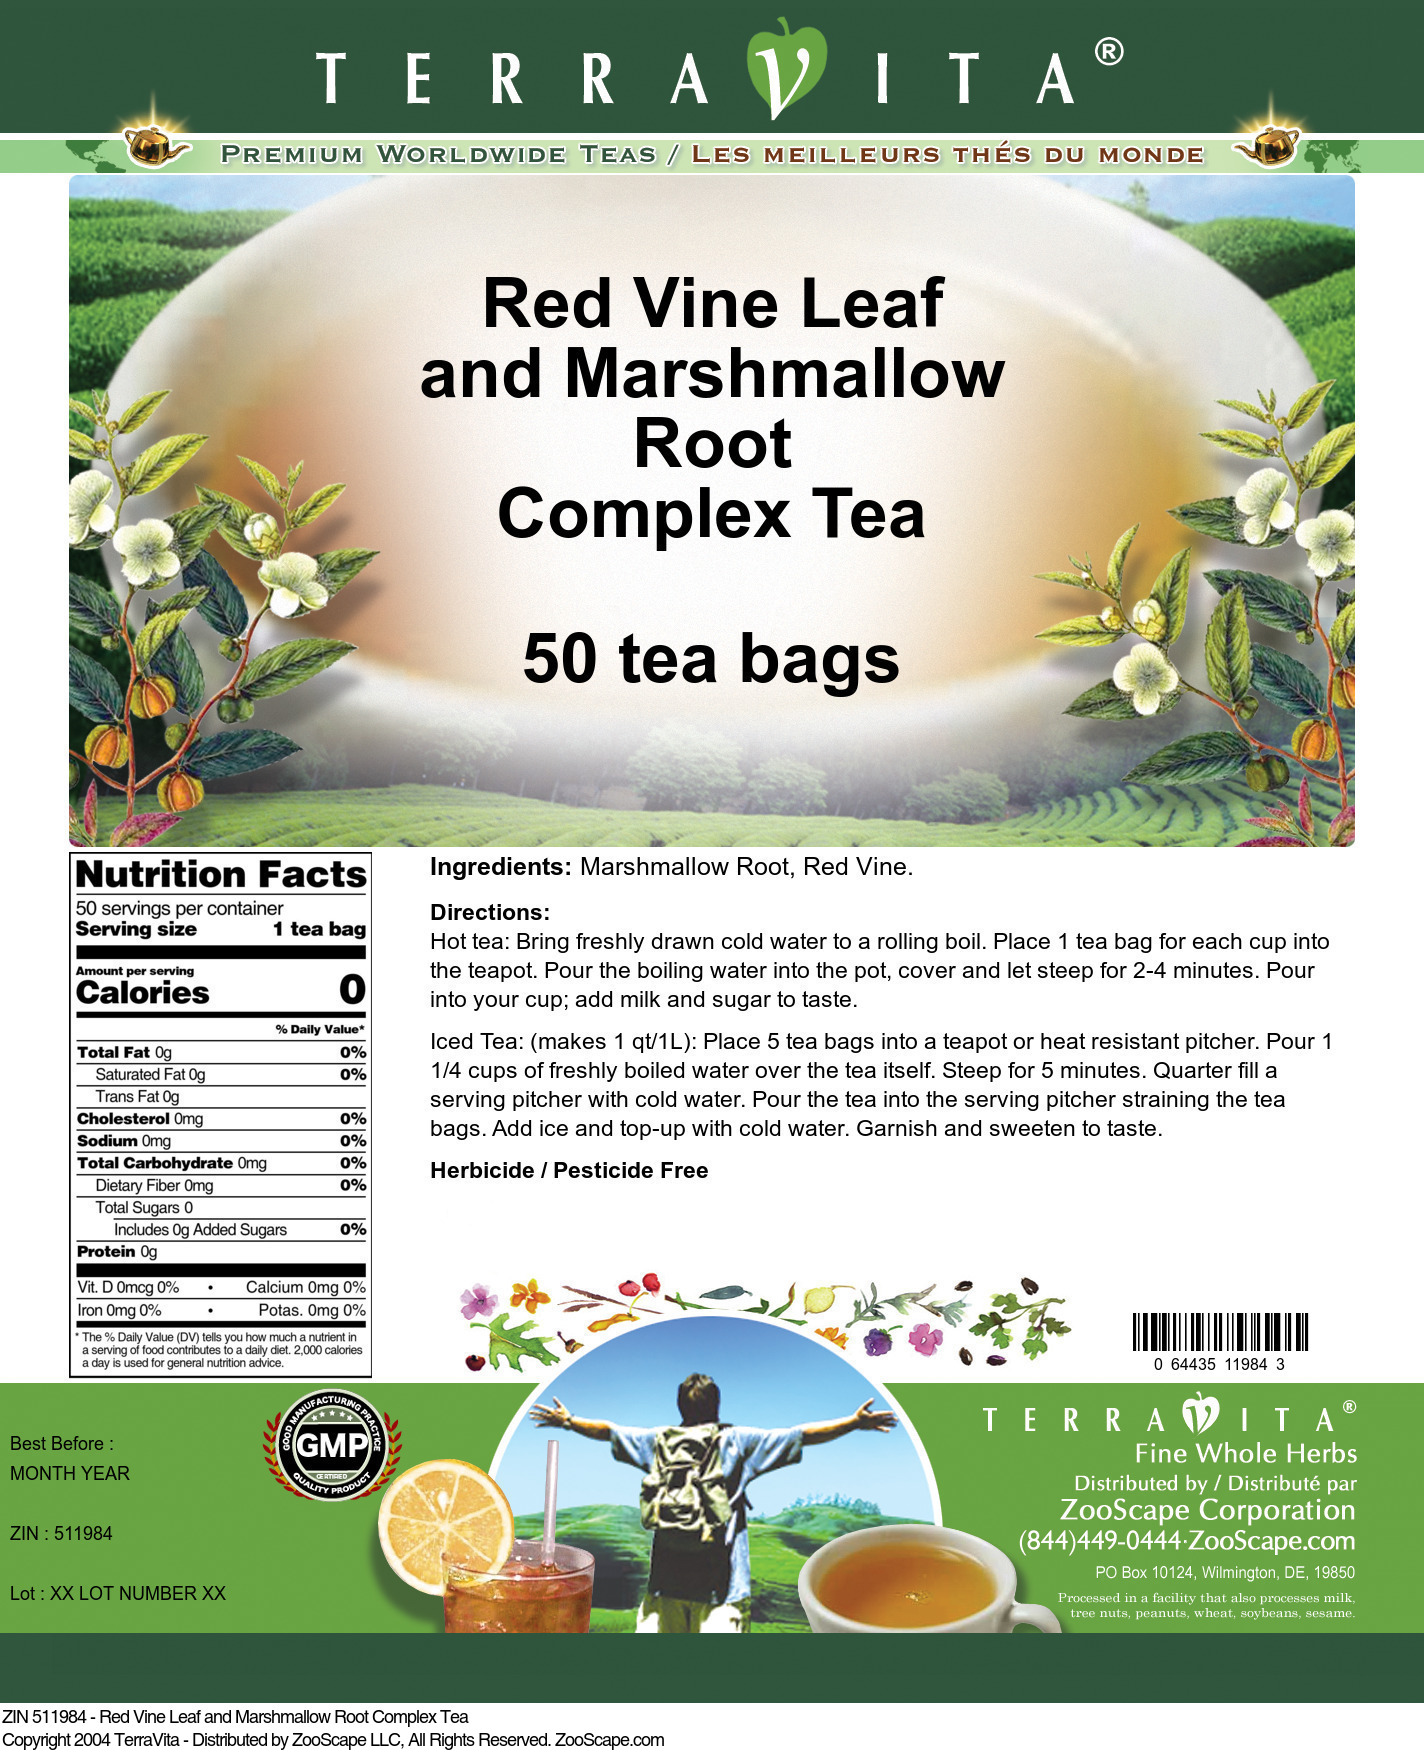 Red Vine Leaf and Marshmallow Root Complex Tea - Label